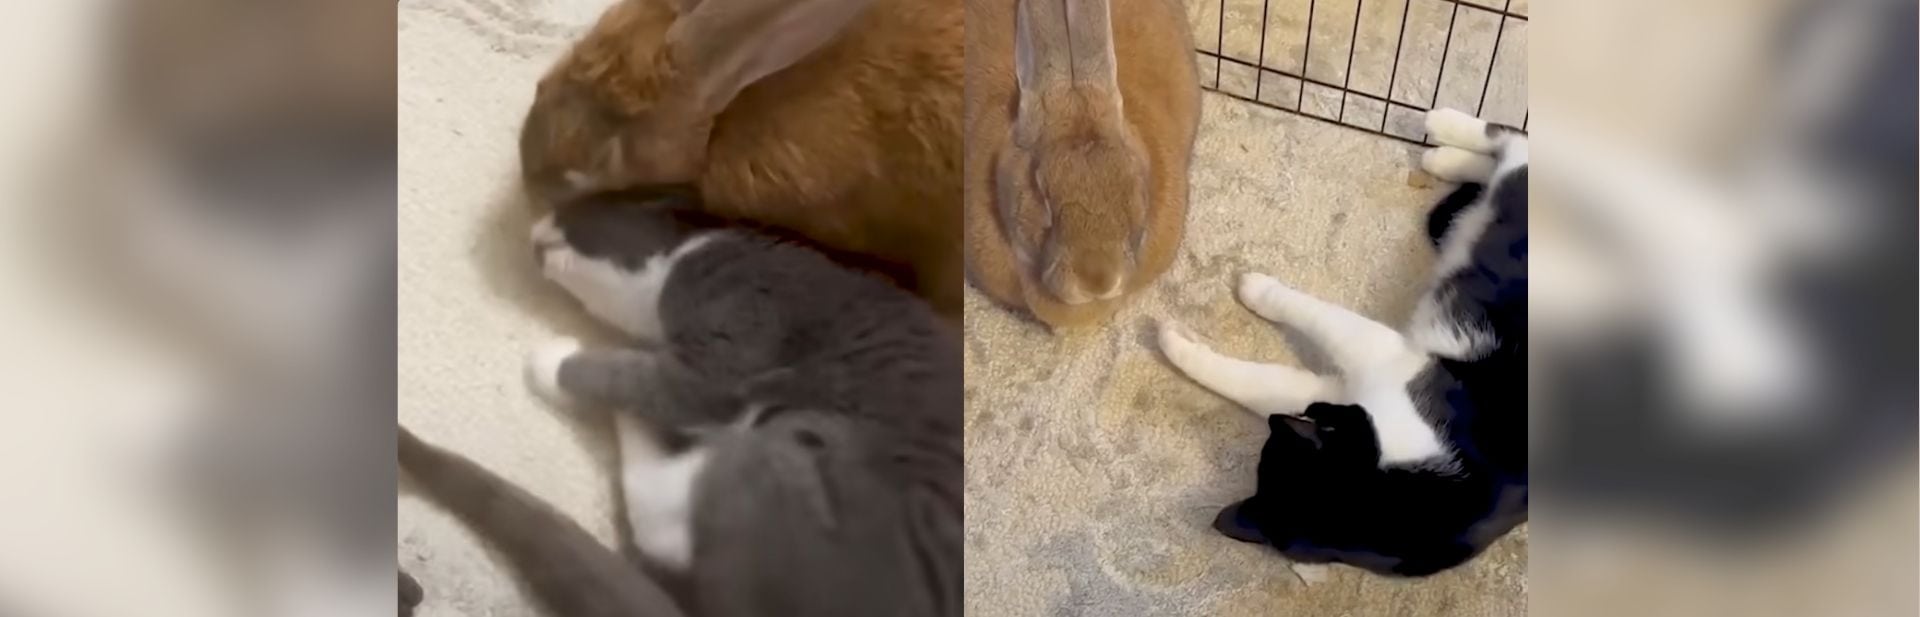 Rescued Rabbit Finds Joy as Foster Mom to Adorable Kittens